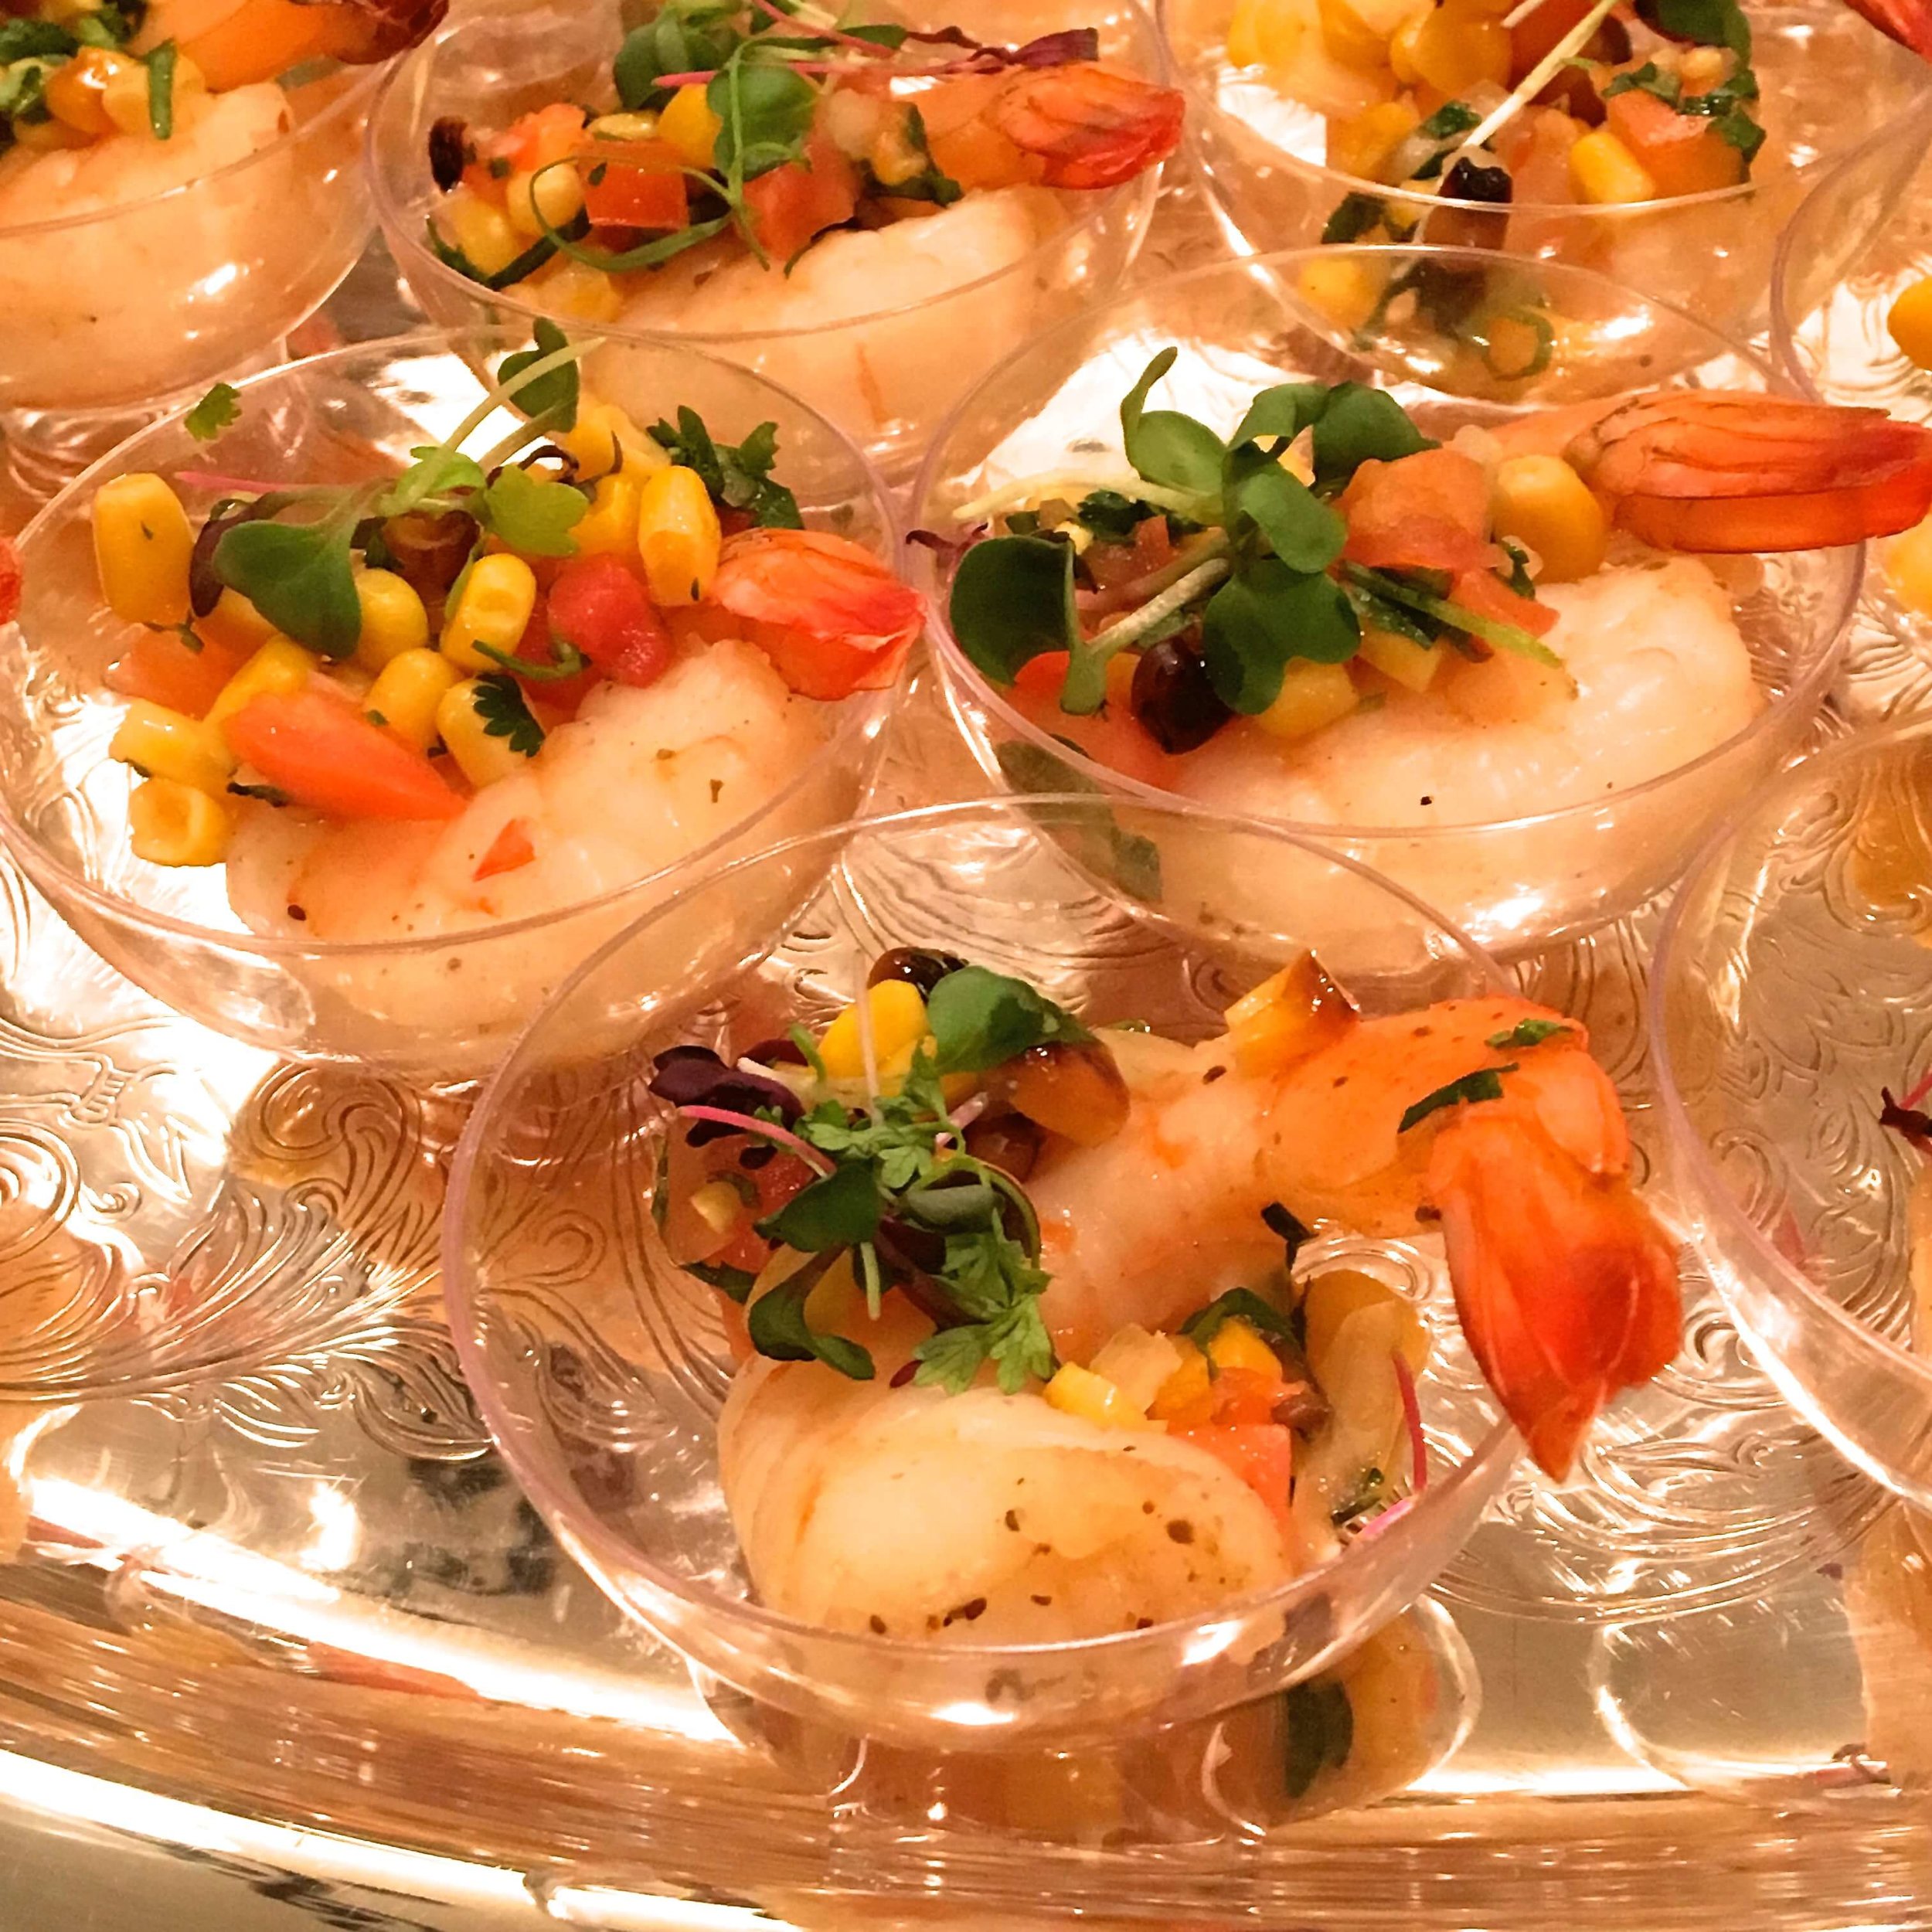 Full-Service Catering Gallery — Catering & Events by Suzette